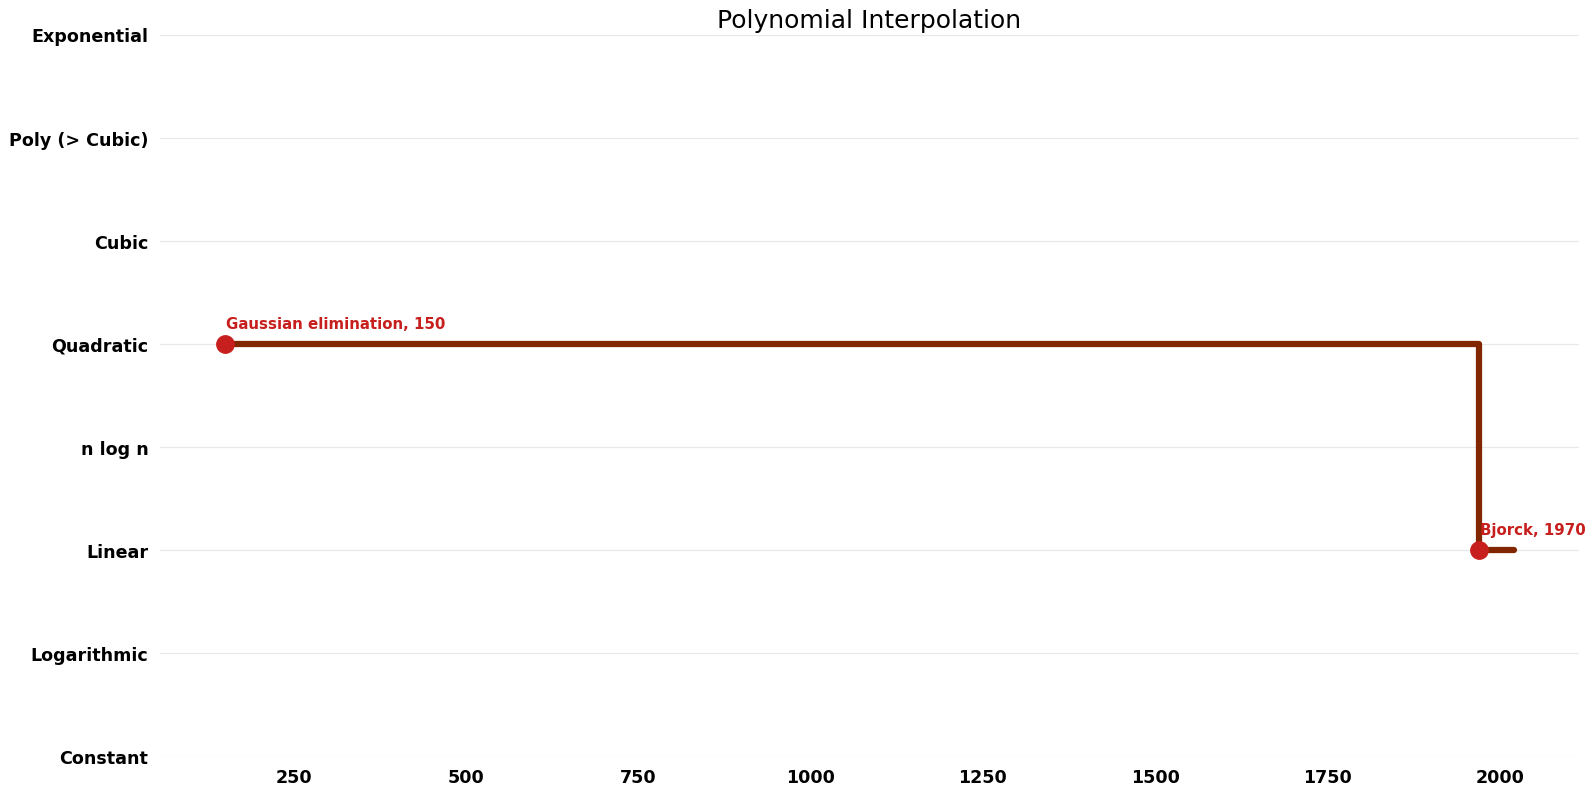 File:Polynomial Interpolation - Space.png